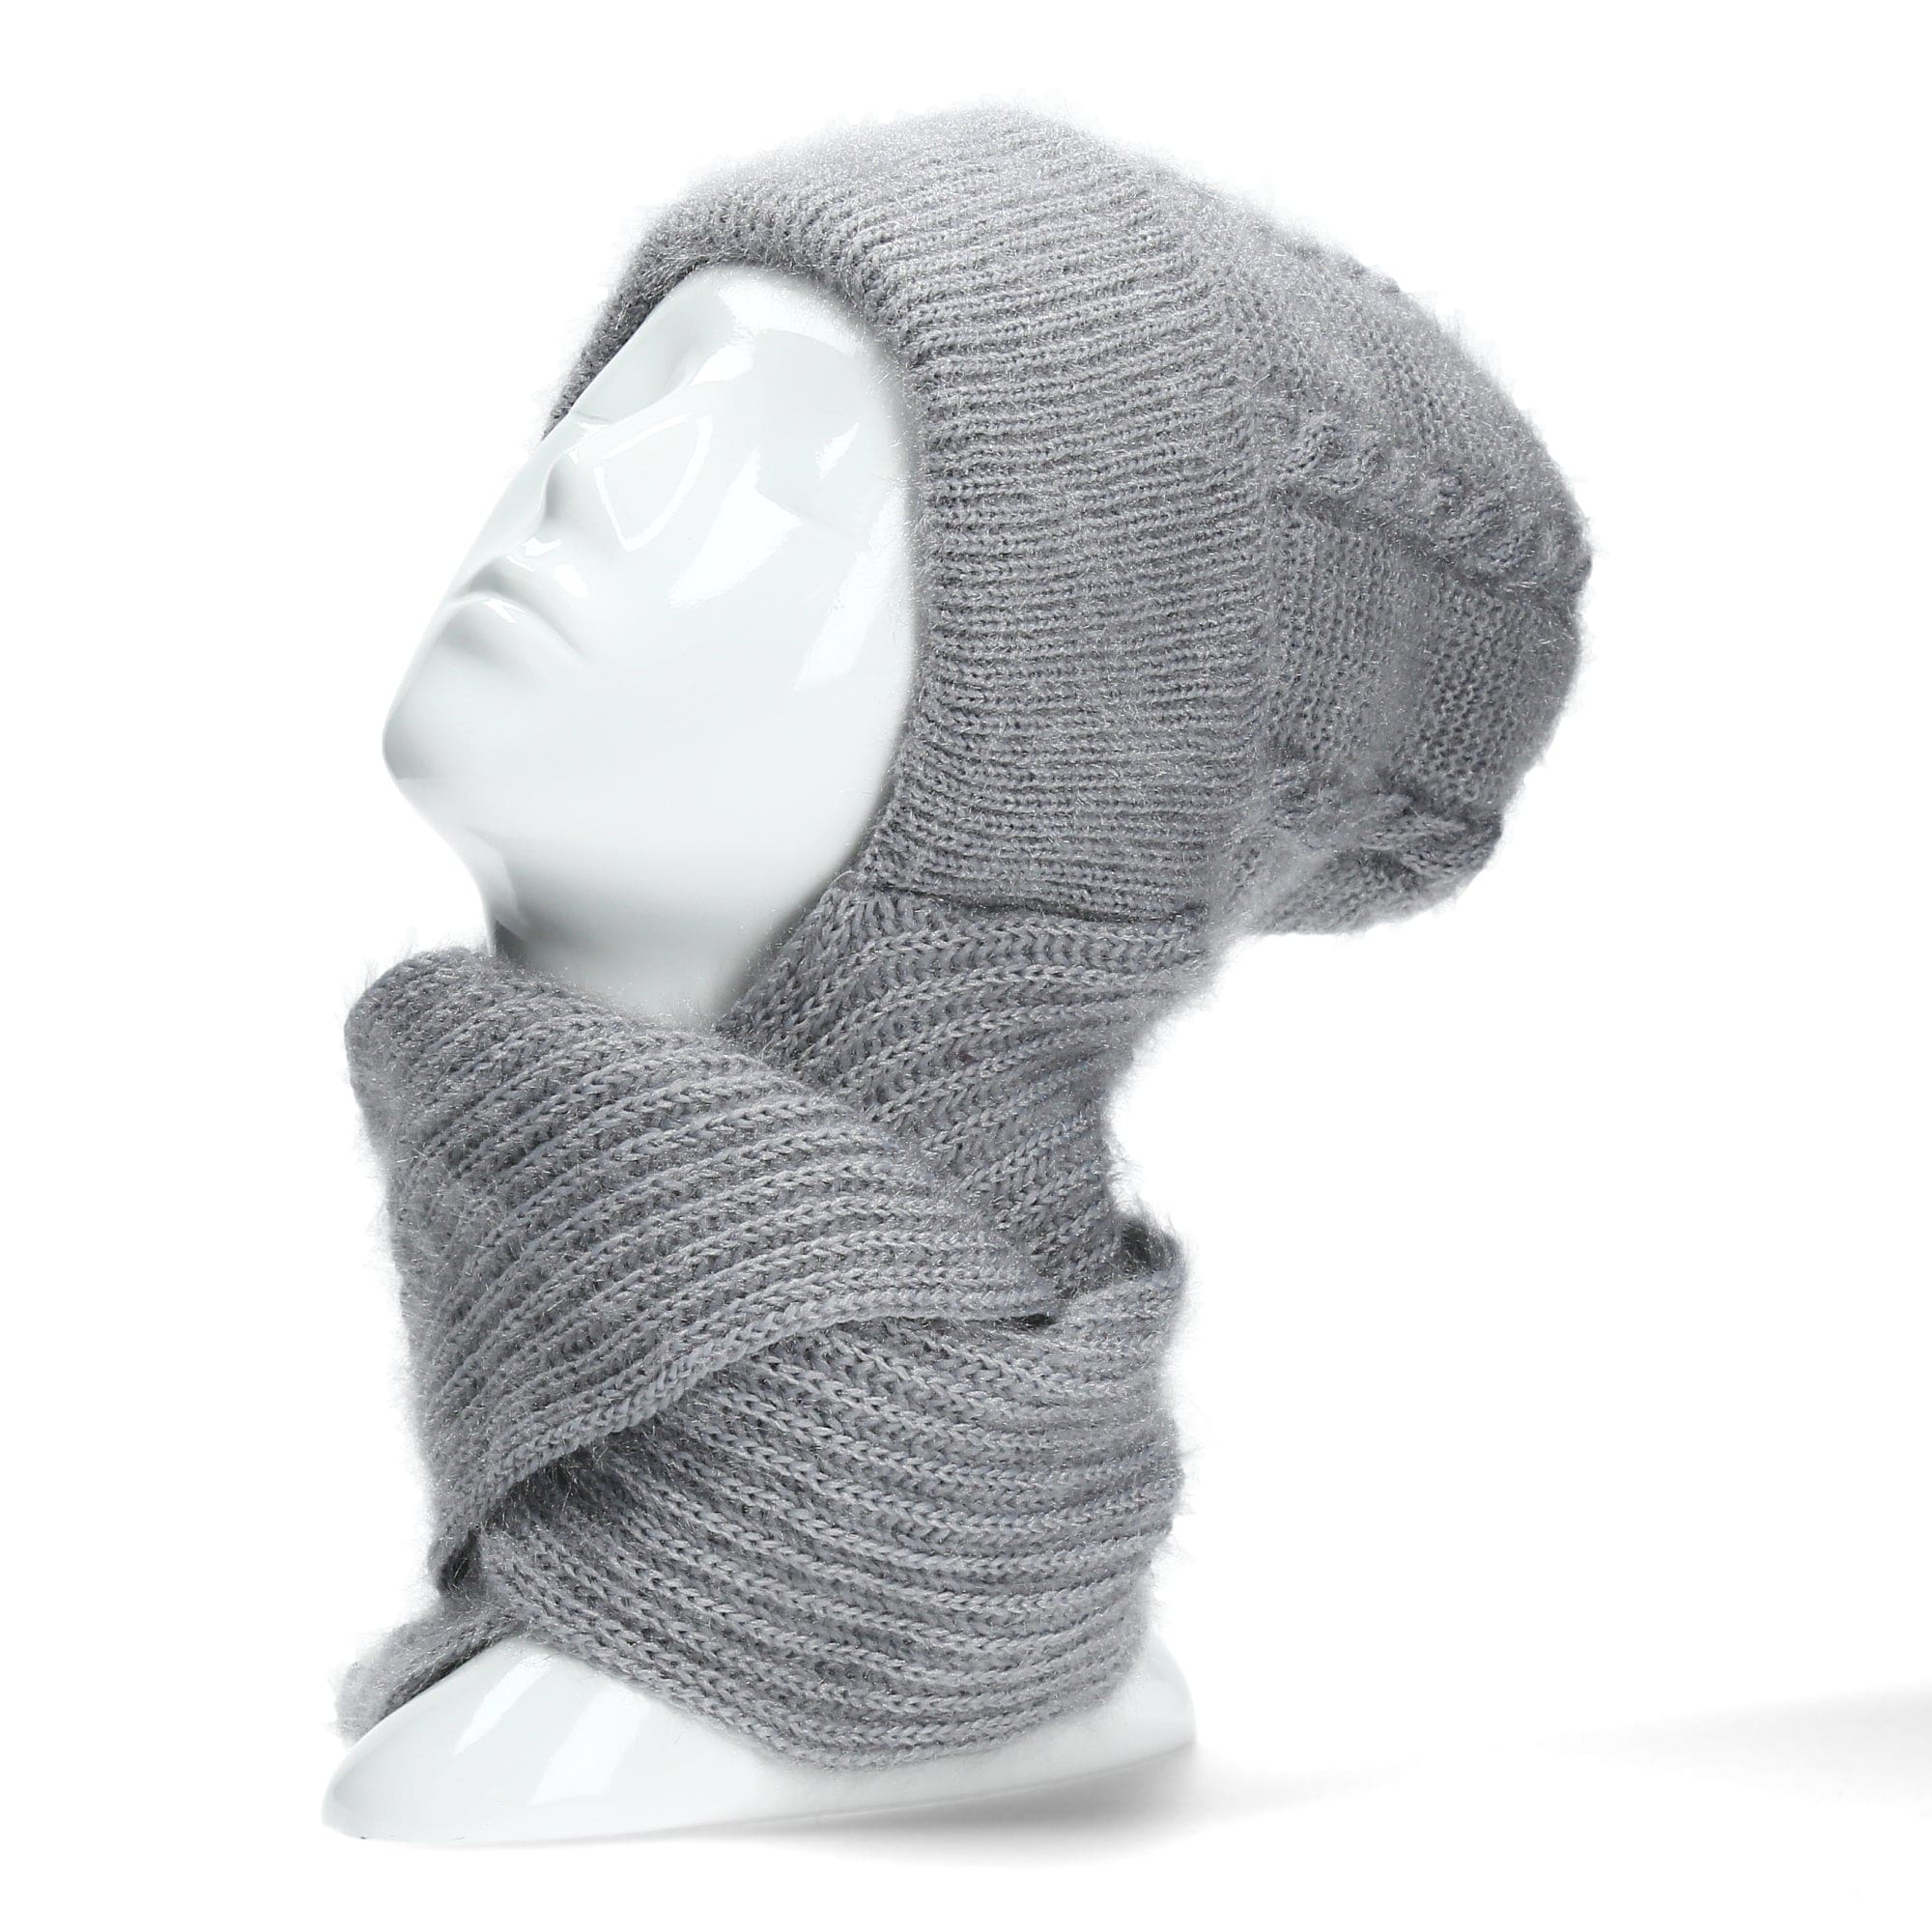 Exclusivity Hooded Scarf - Grey - Hats